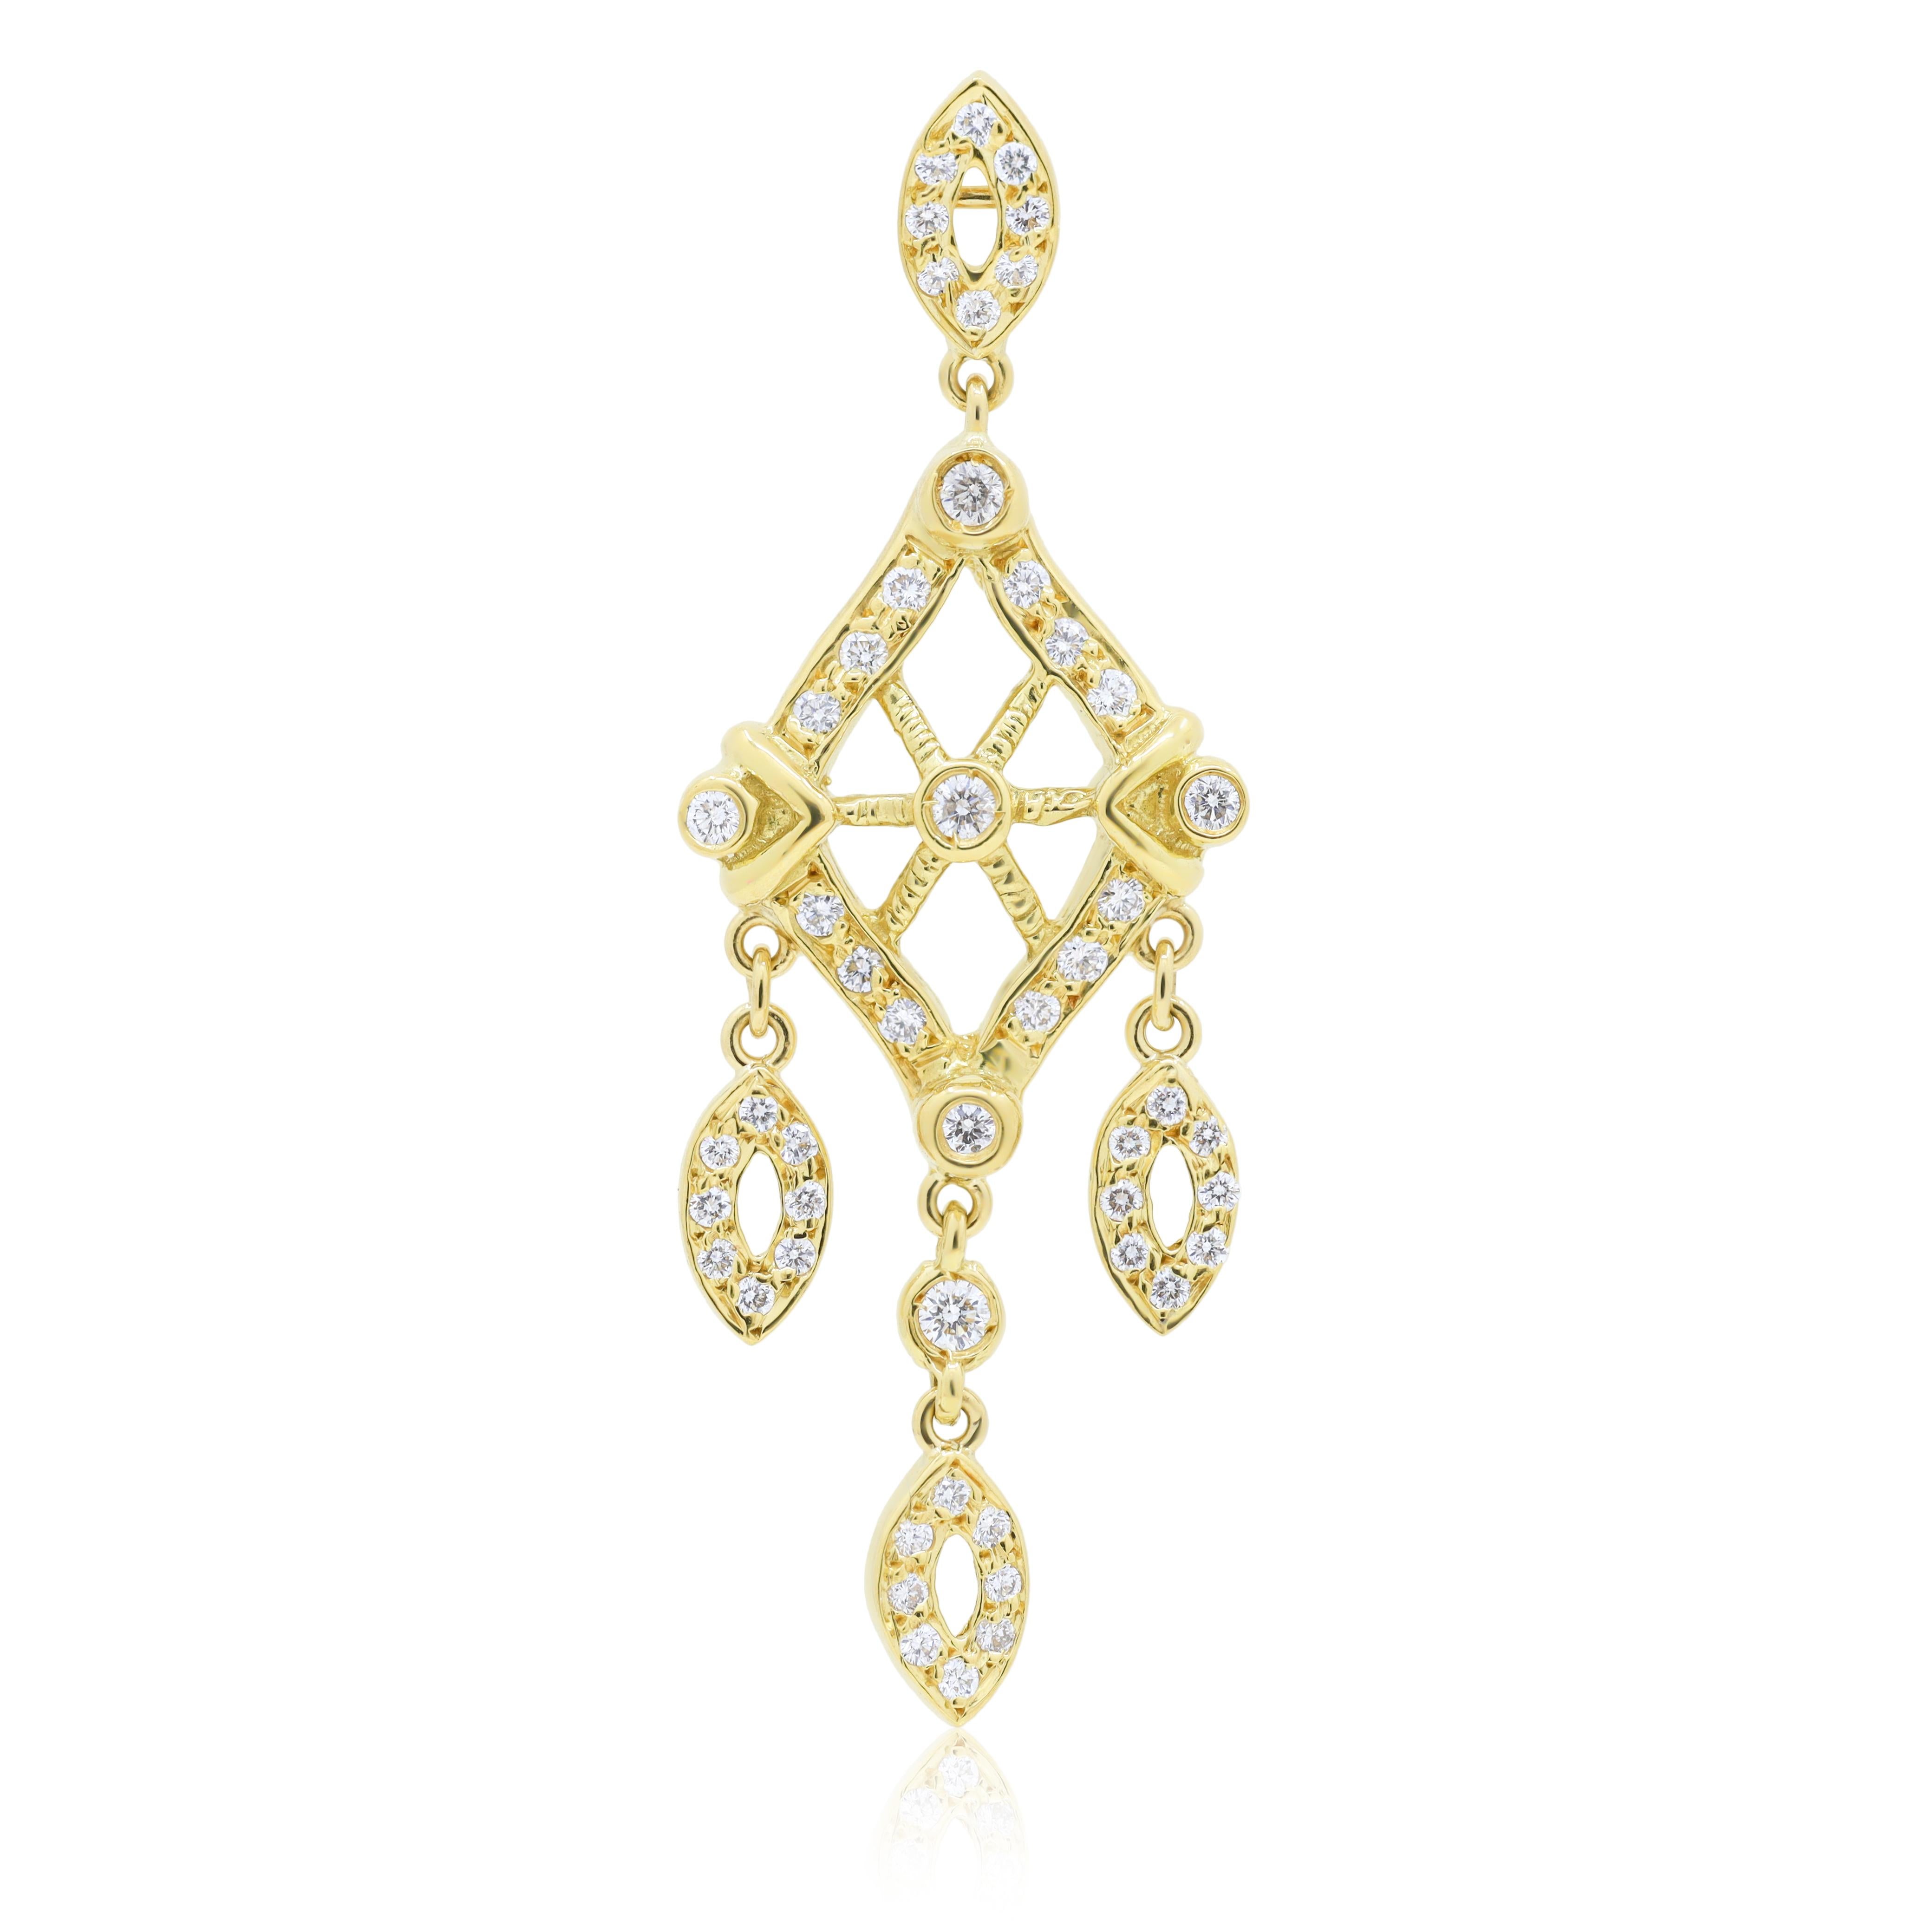 Modern Diana M. 18kt yellow gold earrings diamond shape with 2.00cts total  For Sale